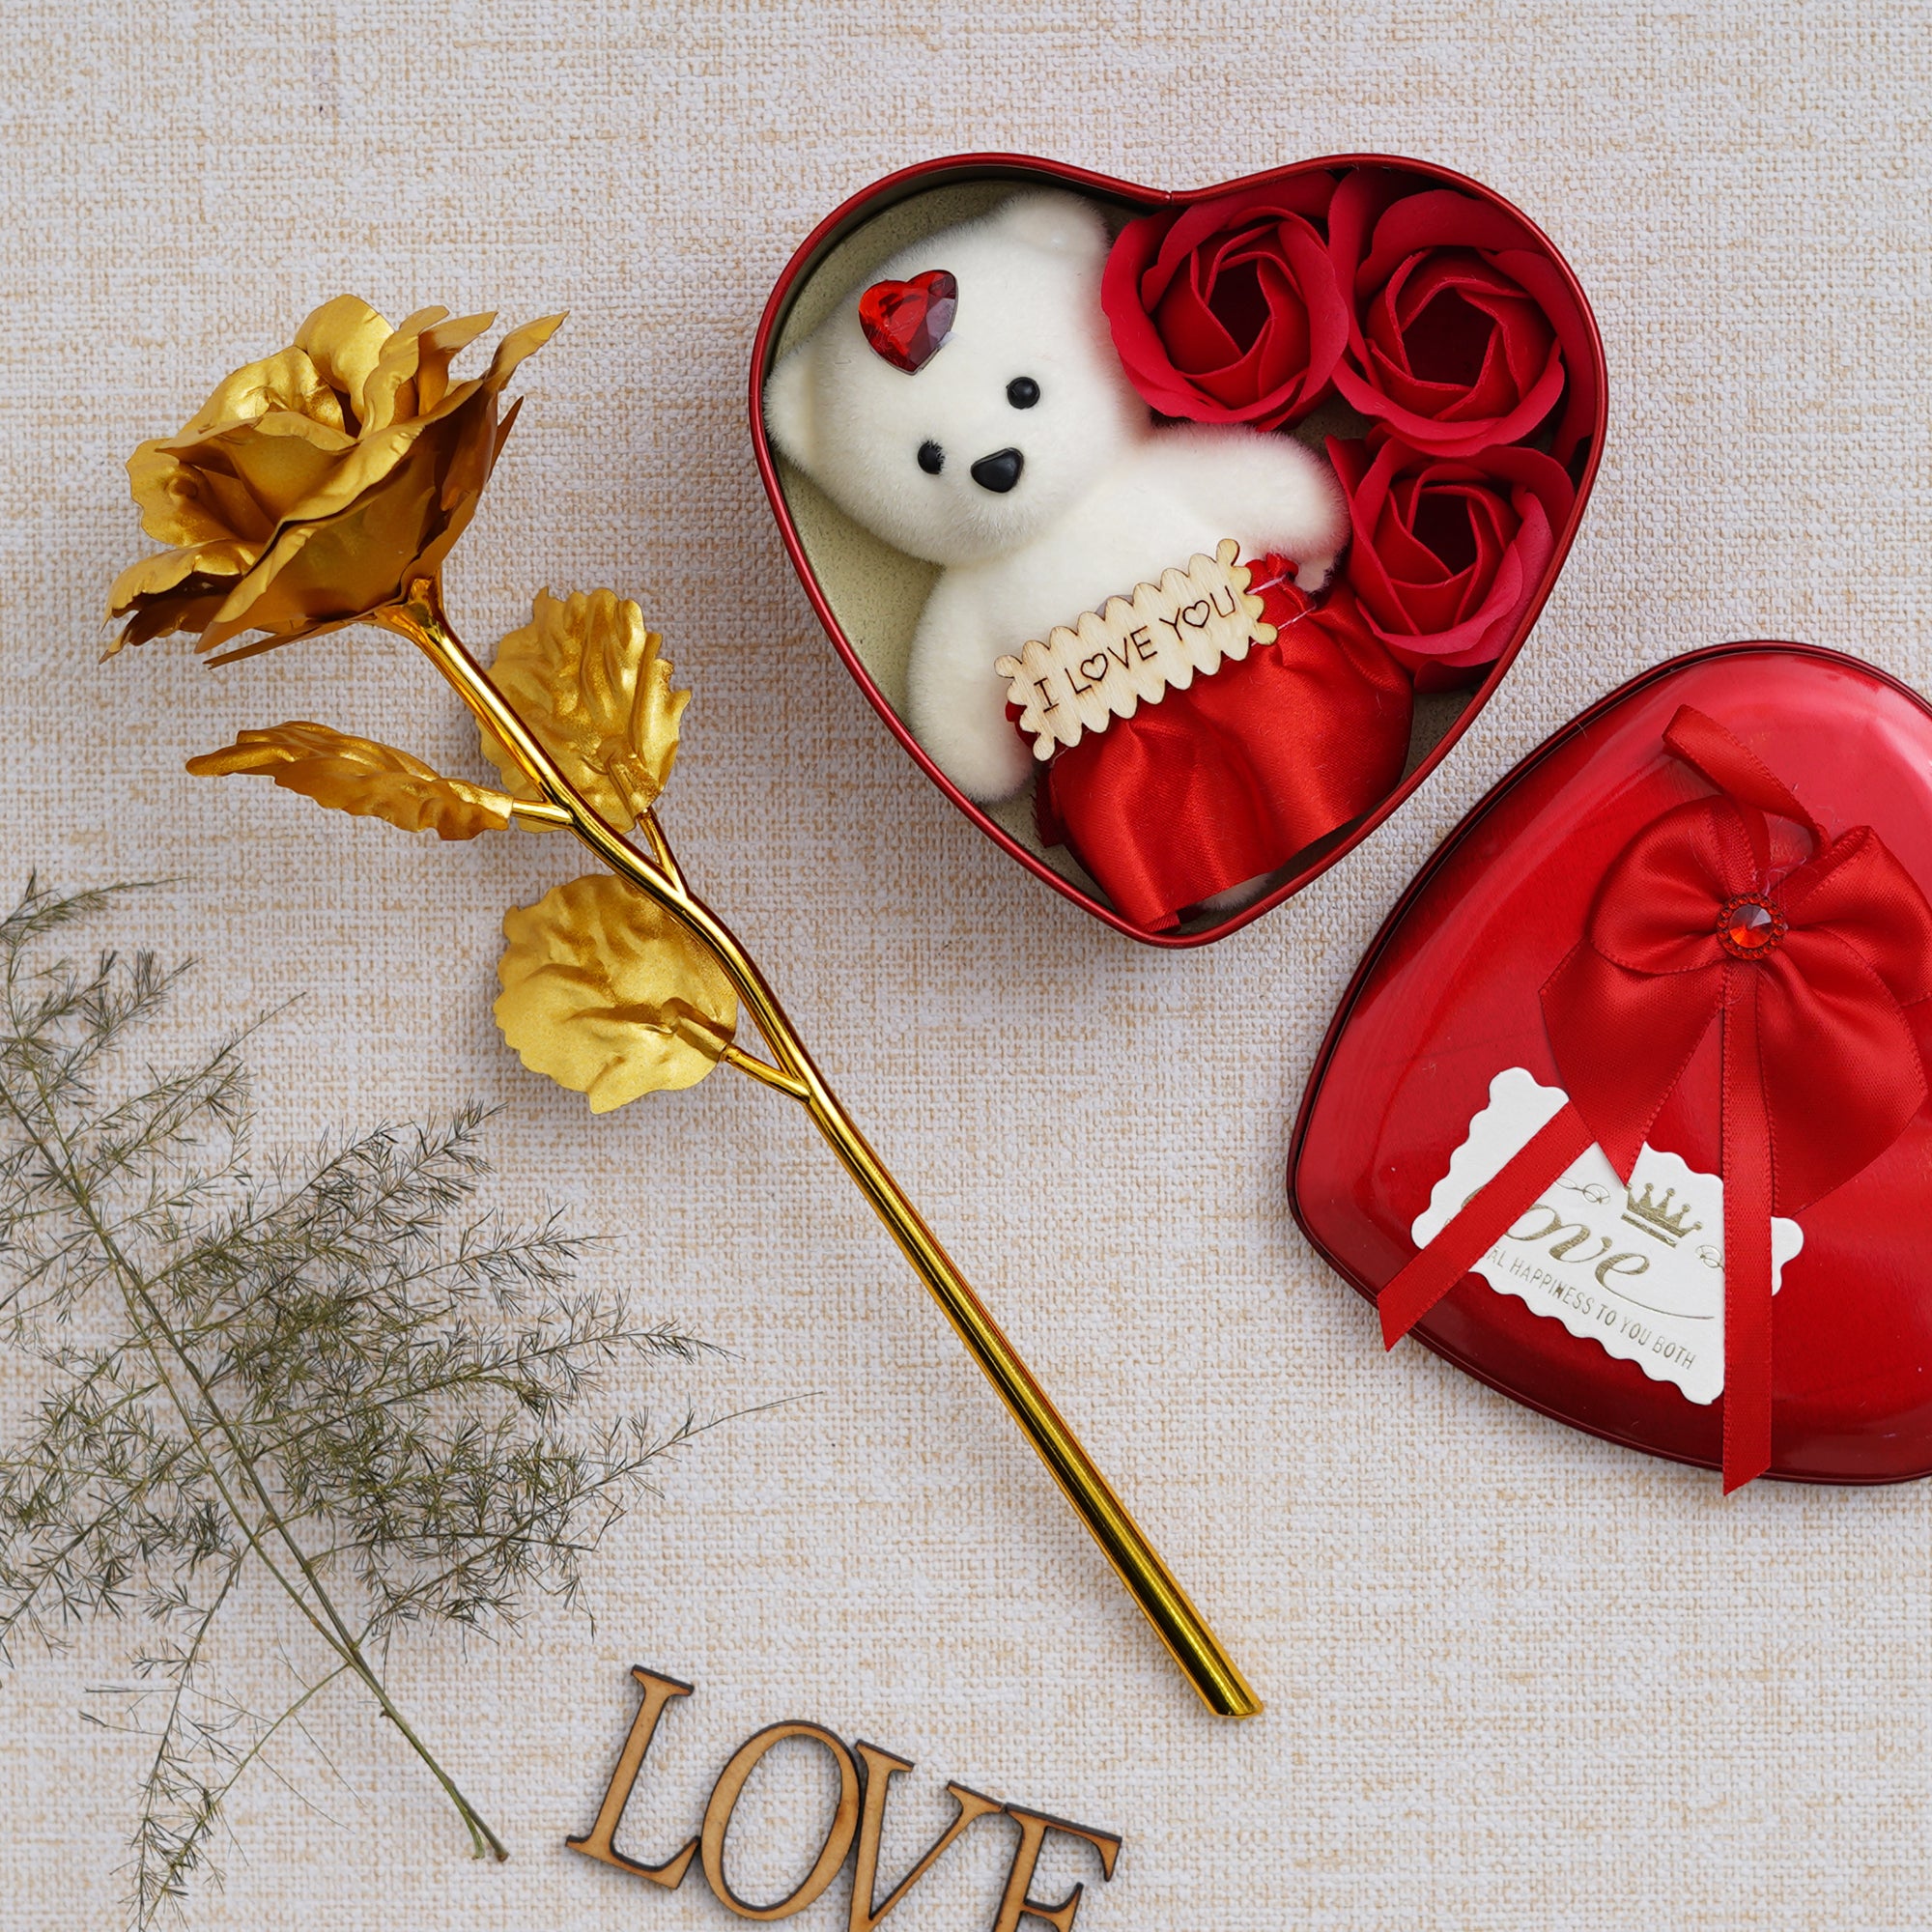 Valentine Combo of Golden Rose Gift Set, Heart Shaped Gift Box Set with White Teddy and Red Roses